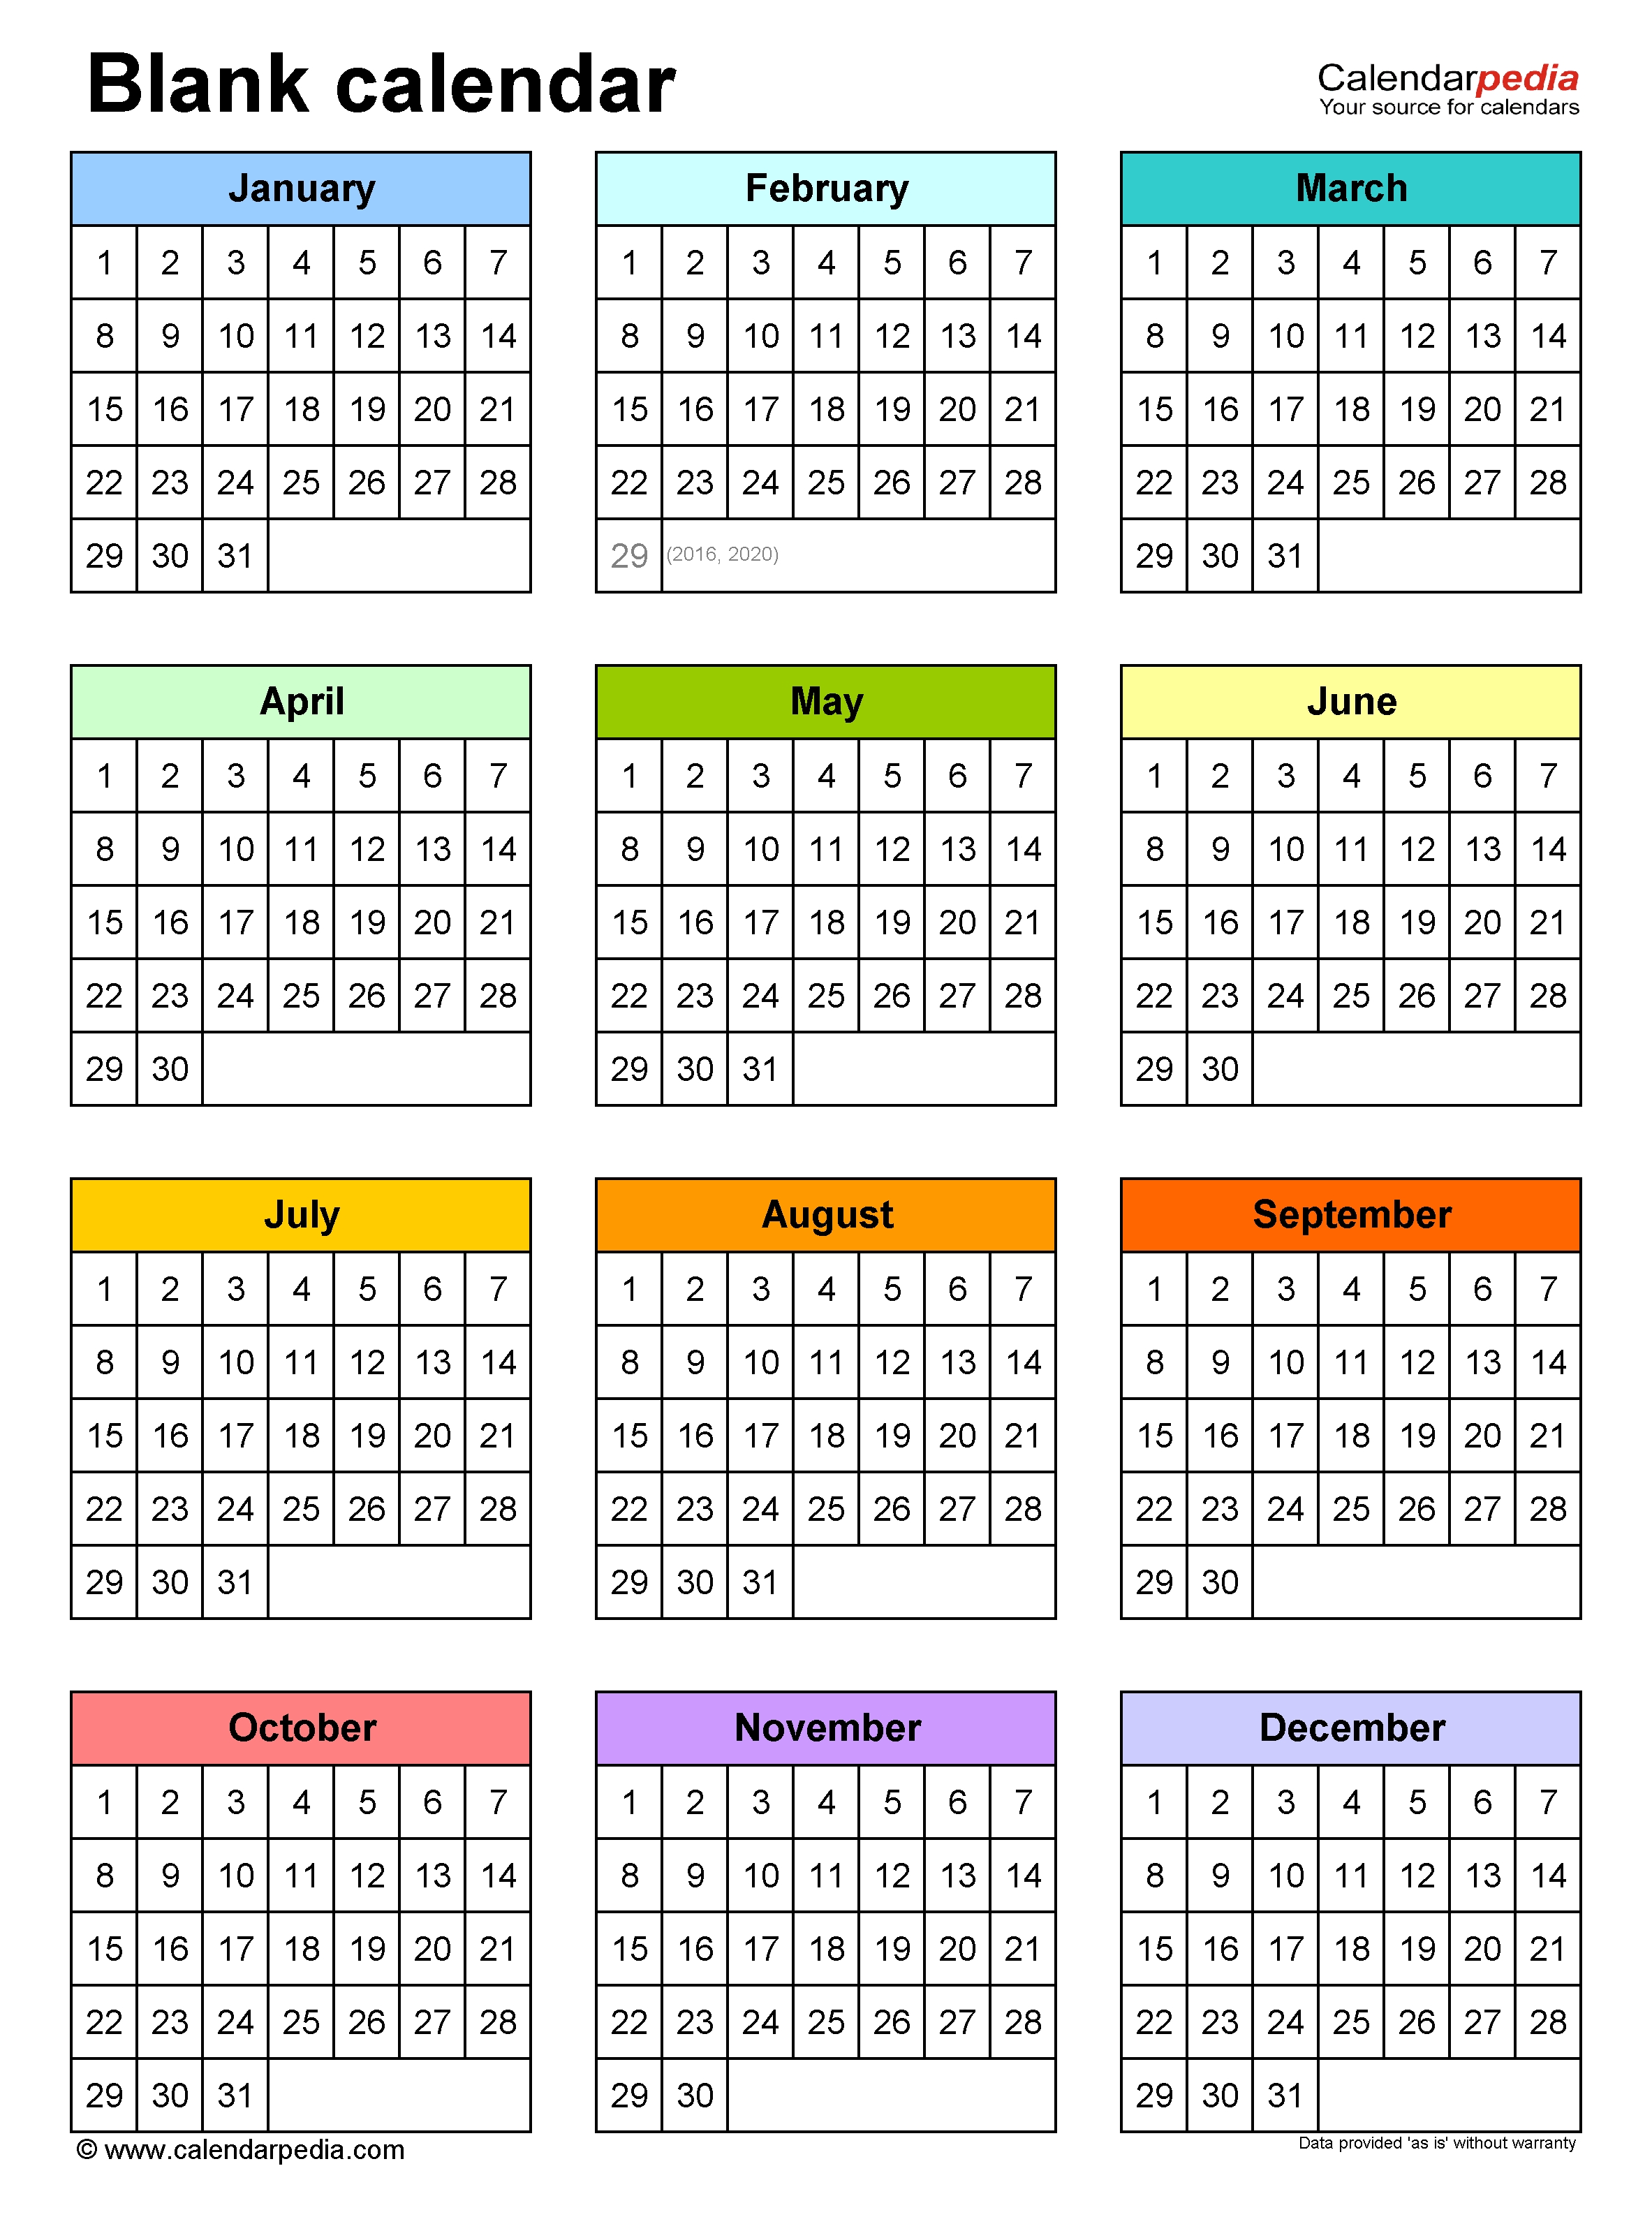 Blank Calendars - Free Printable Microsoft Word Templates Calendar Template Year On One Page